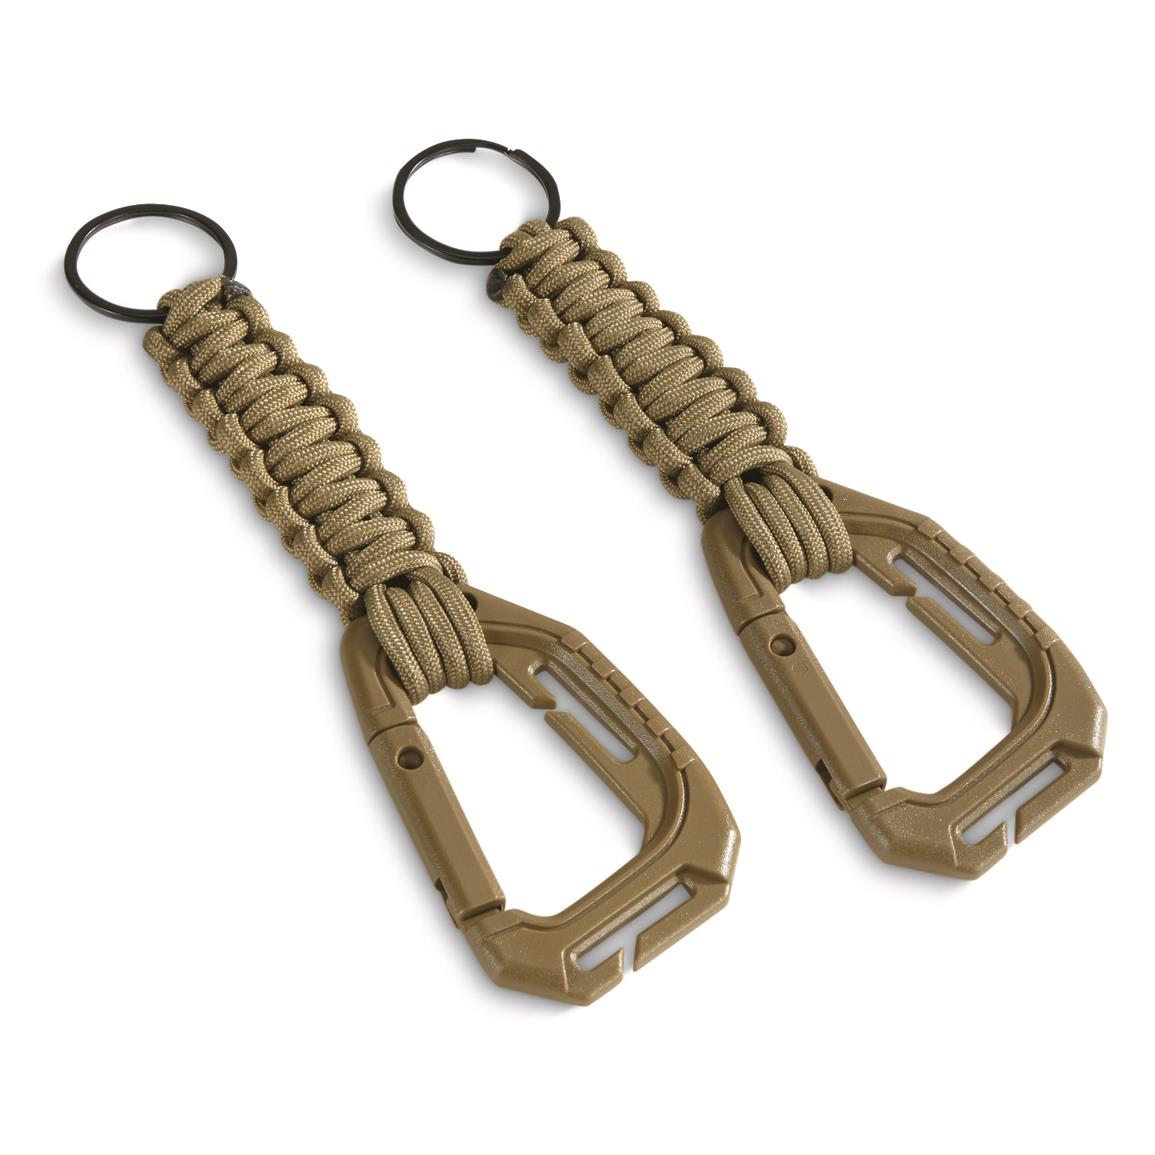 Mil-Tec Tactical Paracord Key Holders, 2 Pack, Coyote